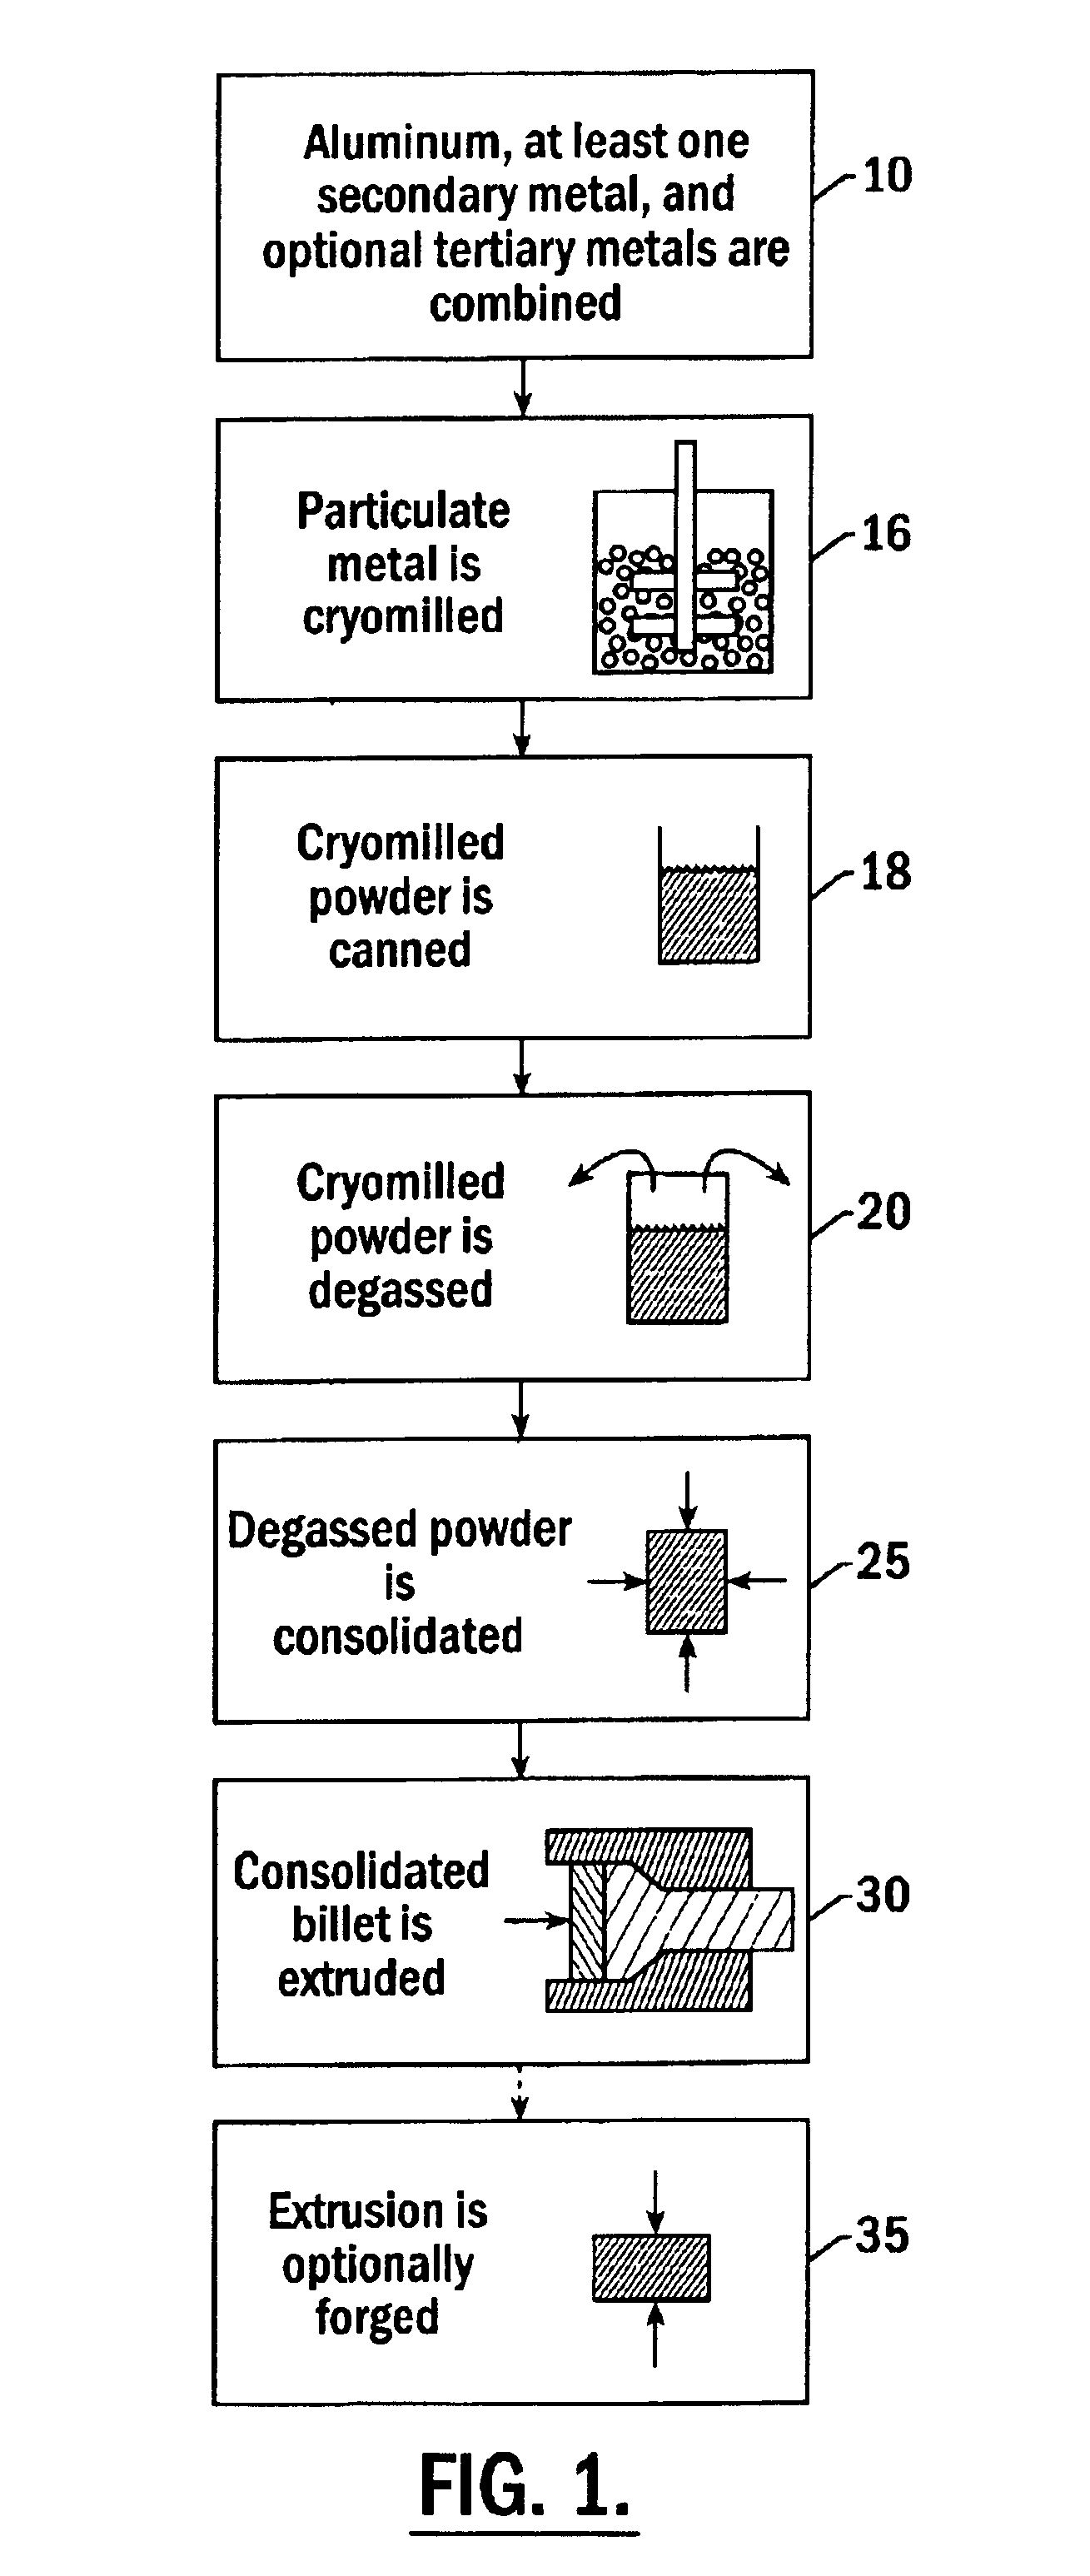 Method for preparing cryomilled aluminum alloys and components extruded and forged therefrom